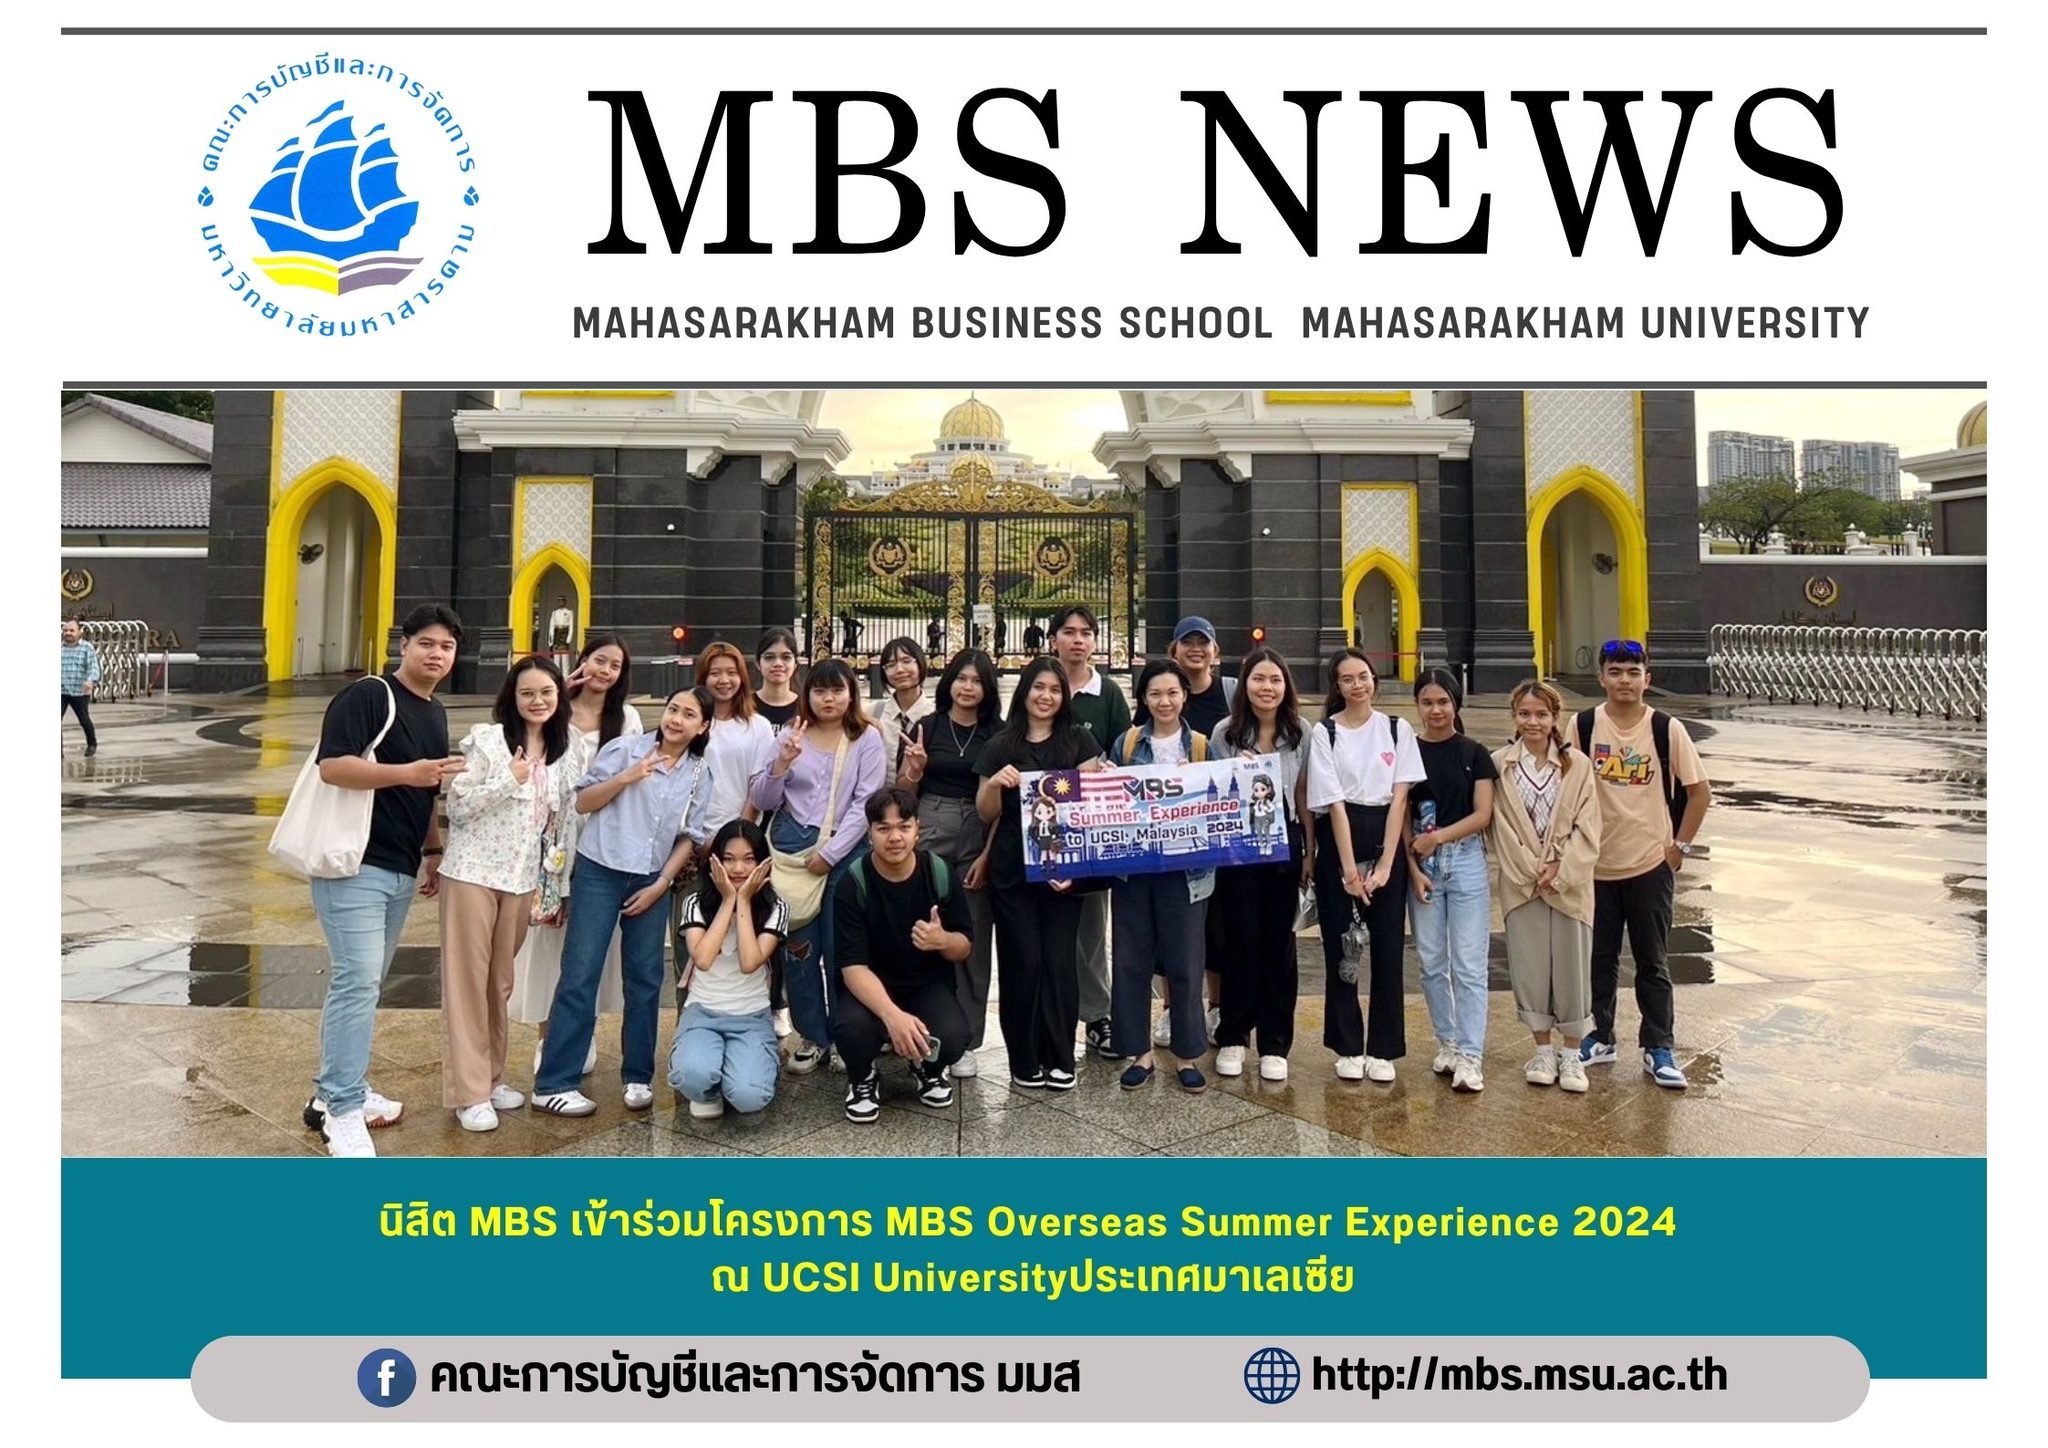 MBS students participate in the MBS Overseas Summer Experience 2024 program at UCSI University, Malaysia.